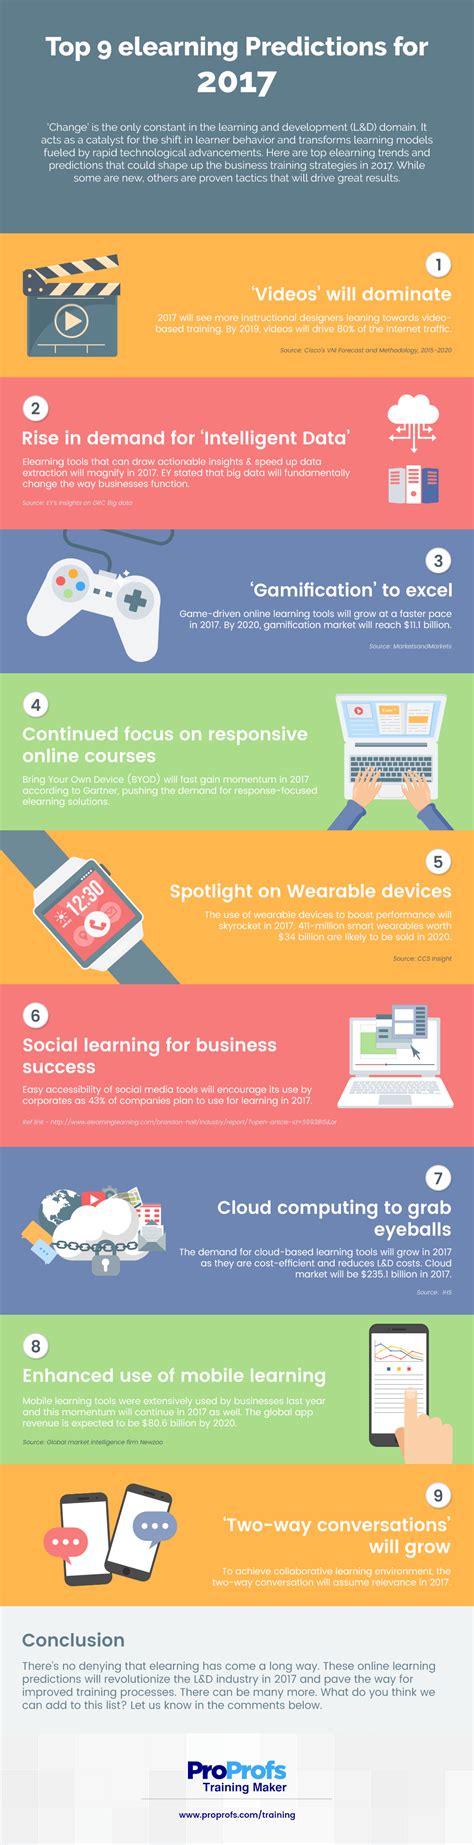 Top 9 eLearning Predictions for 2017 Infographic - e-Learning Infographics